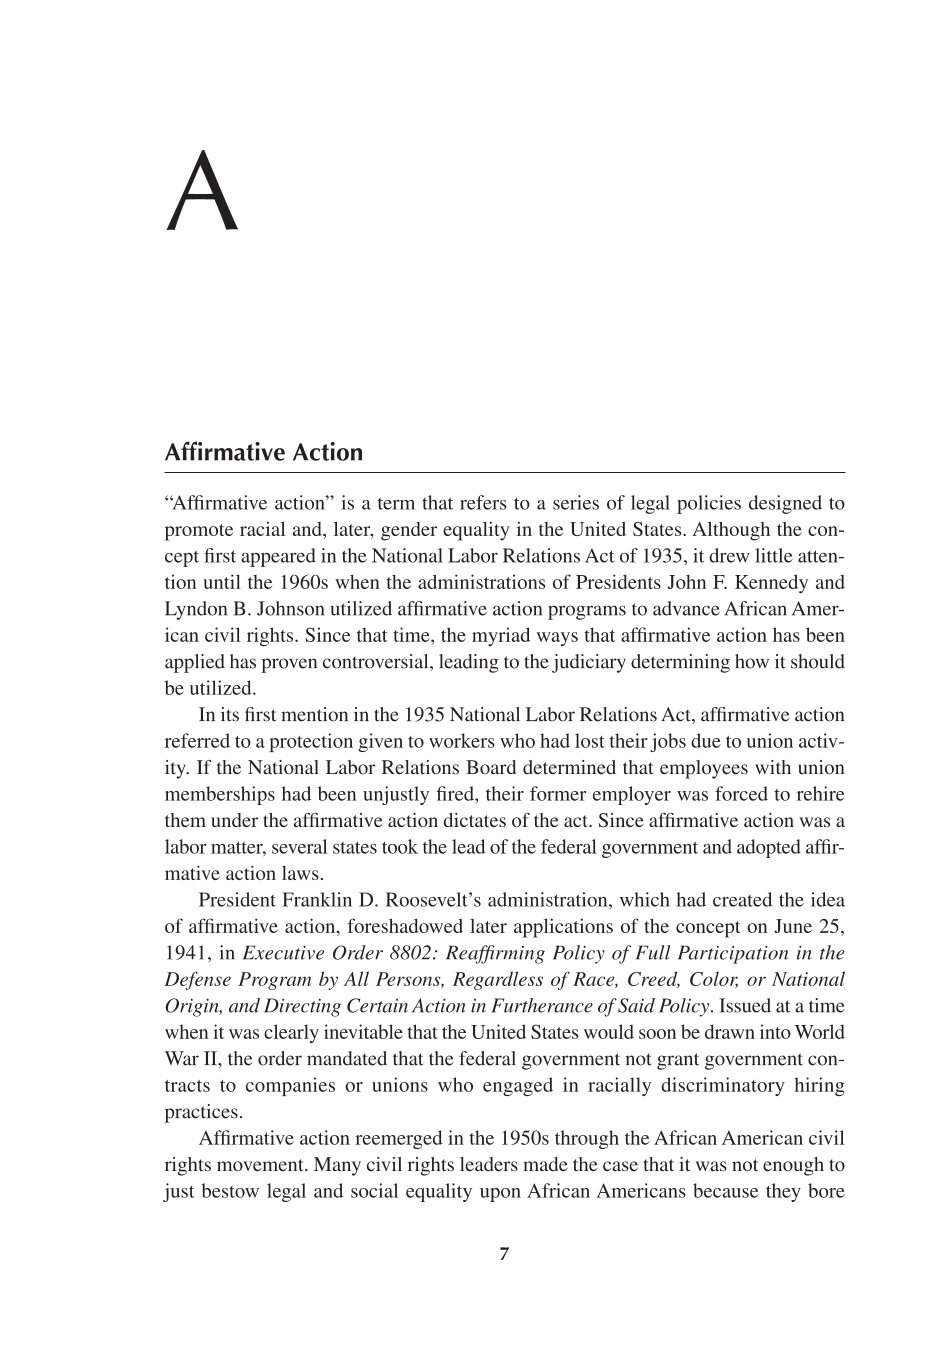 The Great Society and the War on Poverty: An Economic Legacy in Essays and Documents page 7